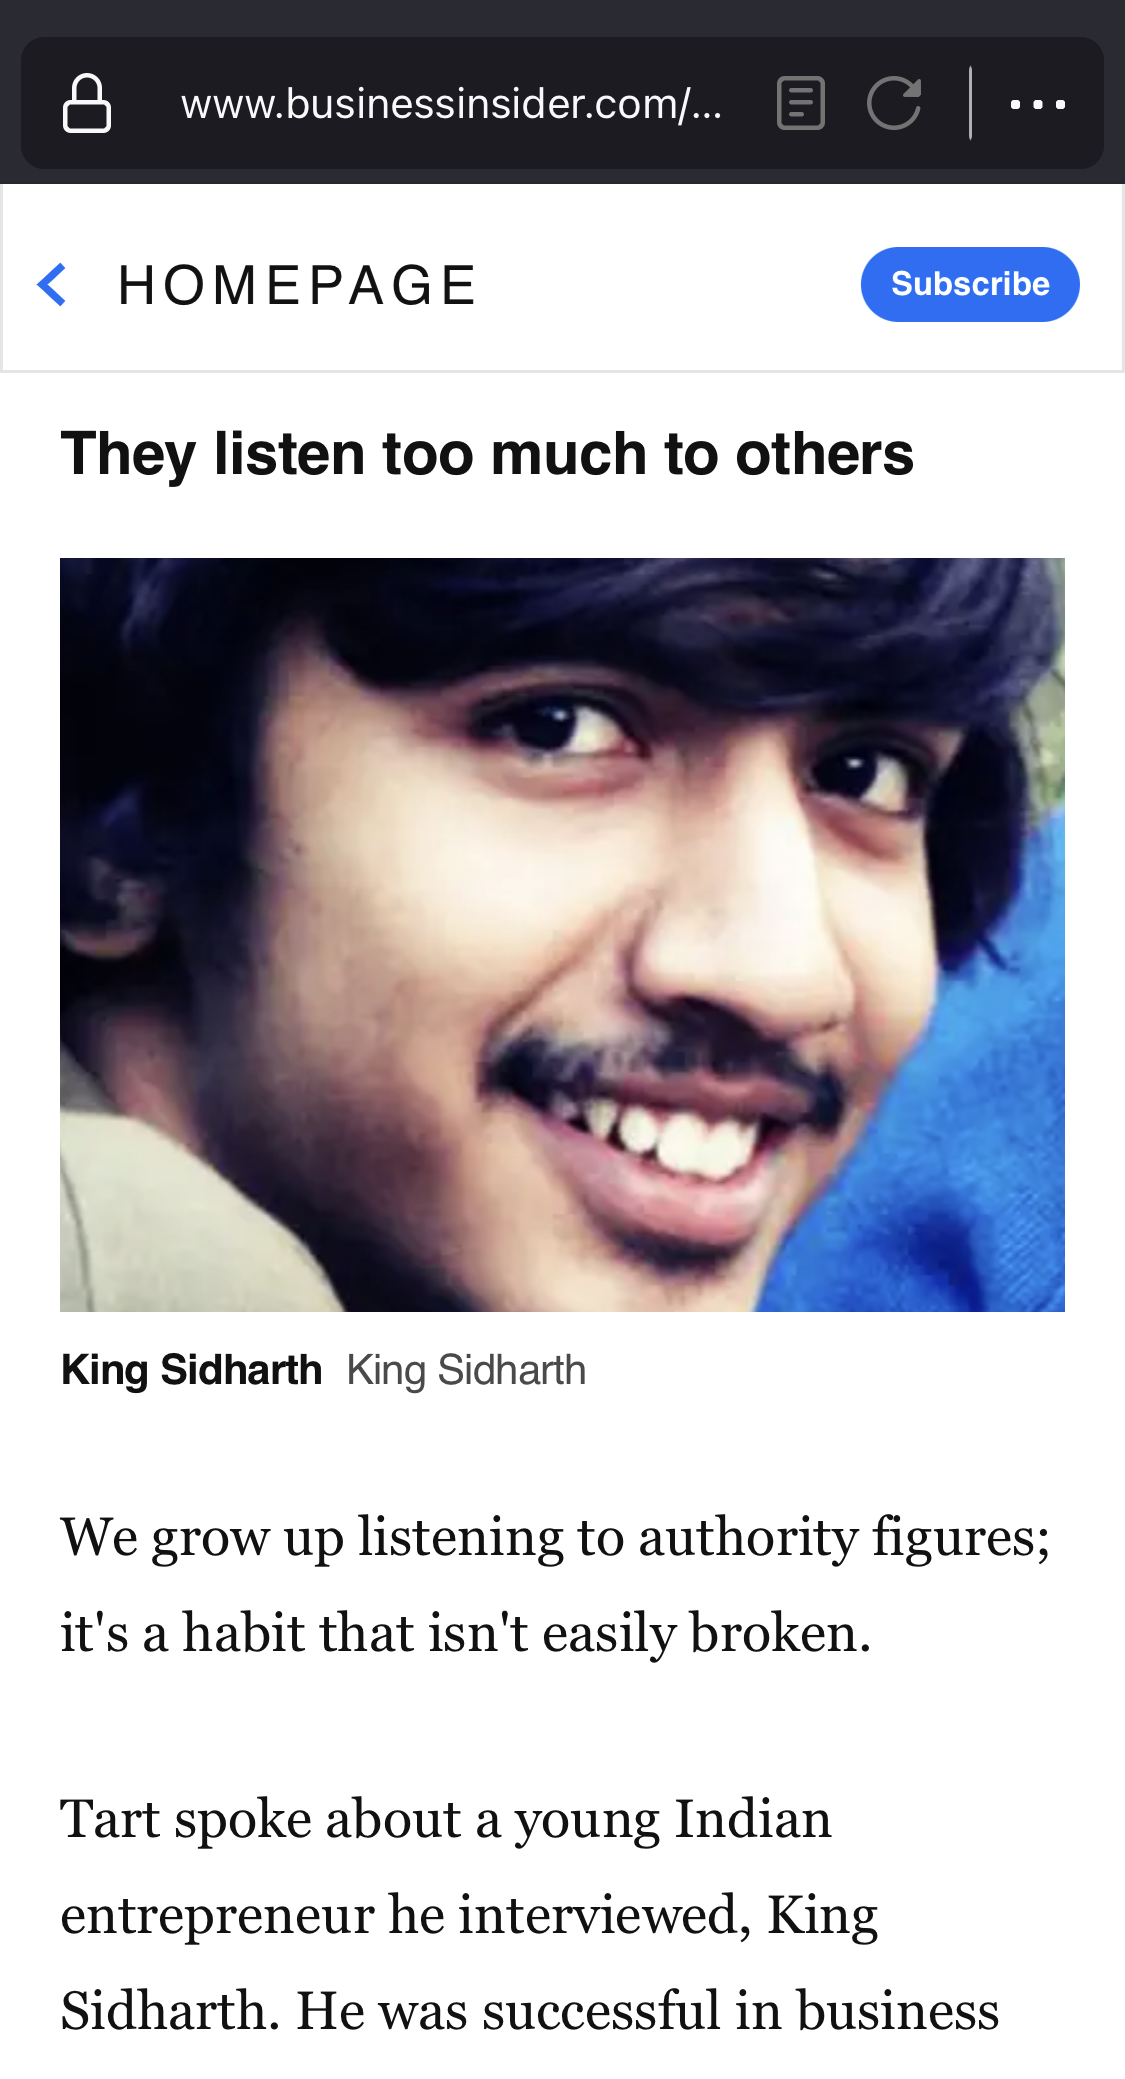 Screenshot of Business Insider article featuring King Sidharth